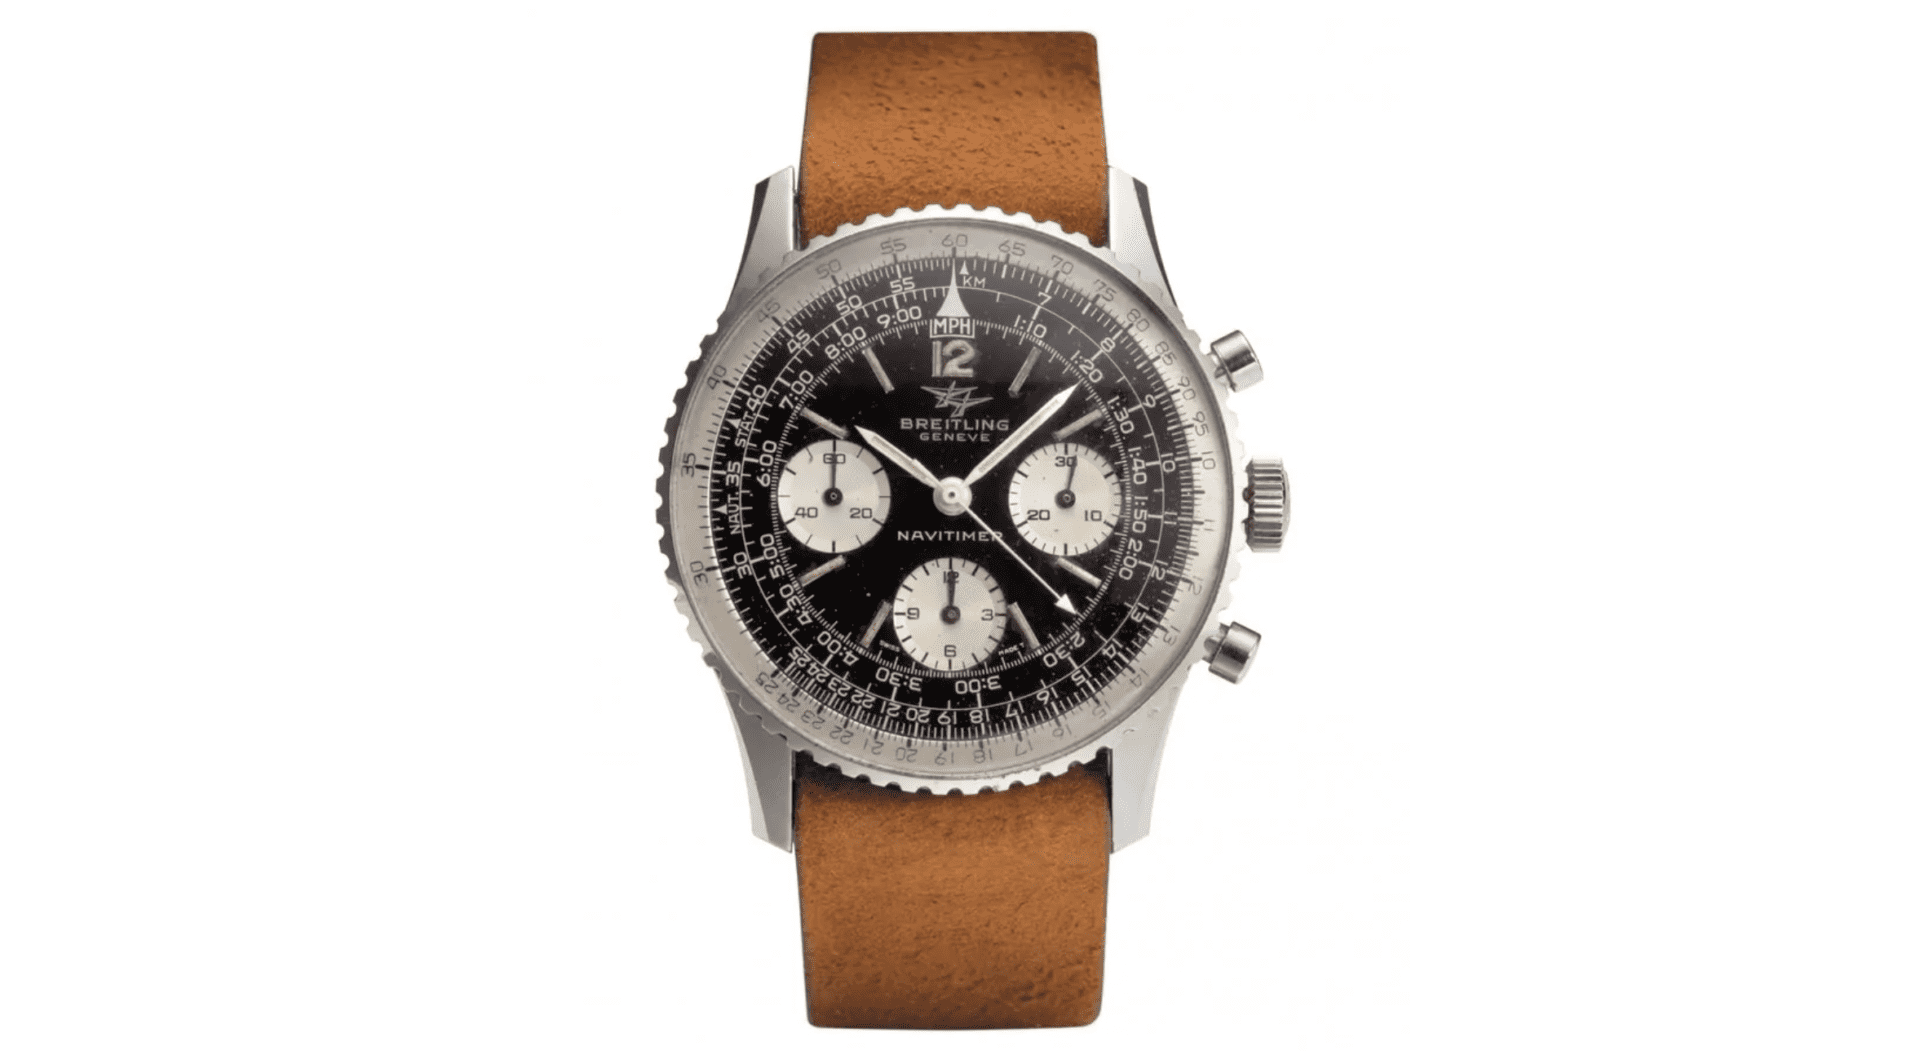 Built for the cockpit, the Breitling Navitimer is a true pilot’s watch